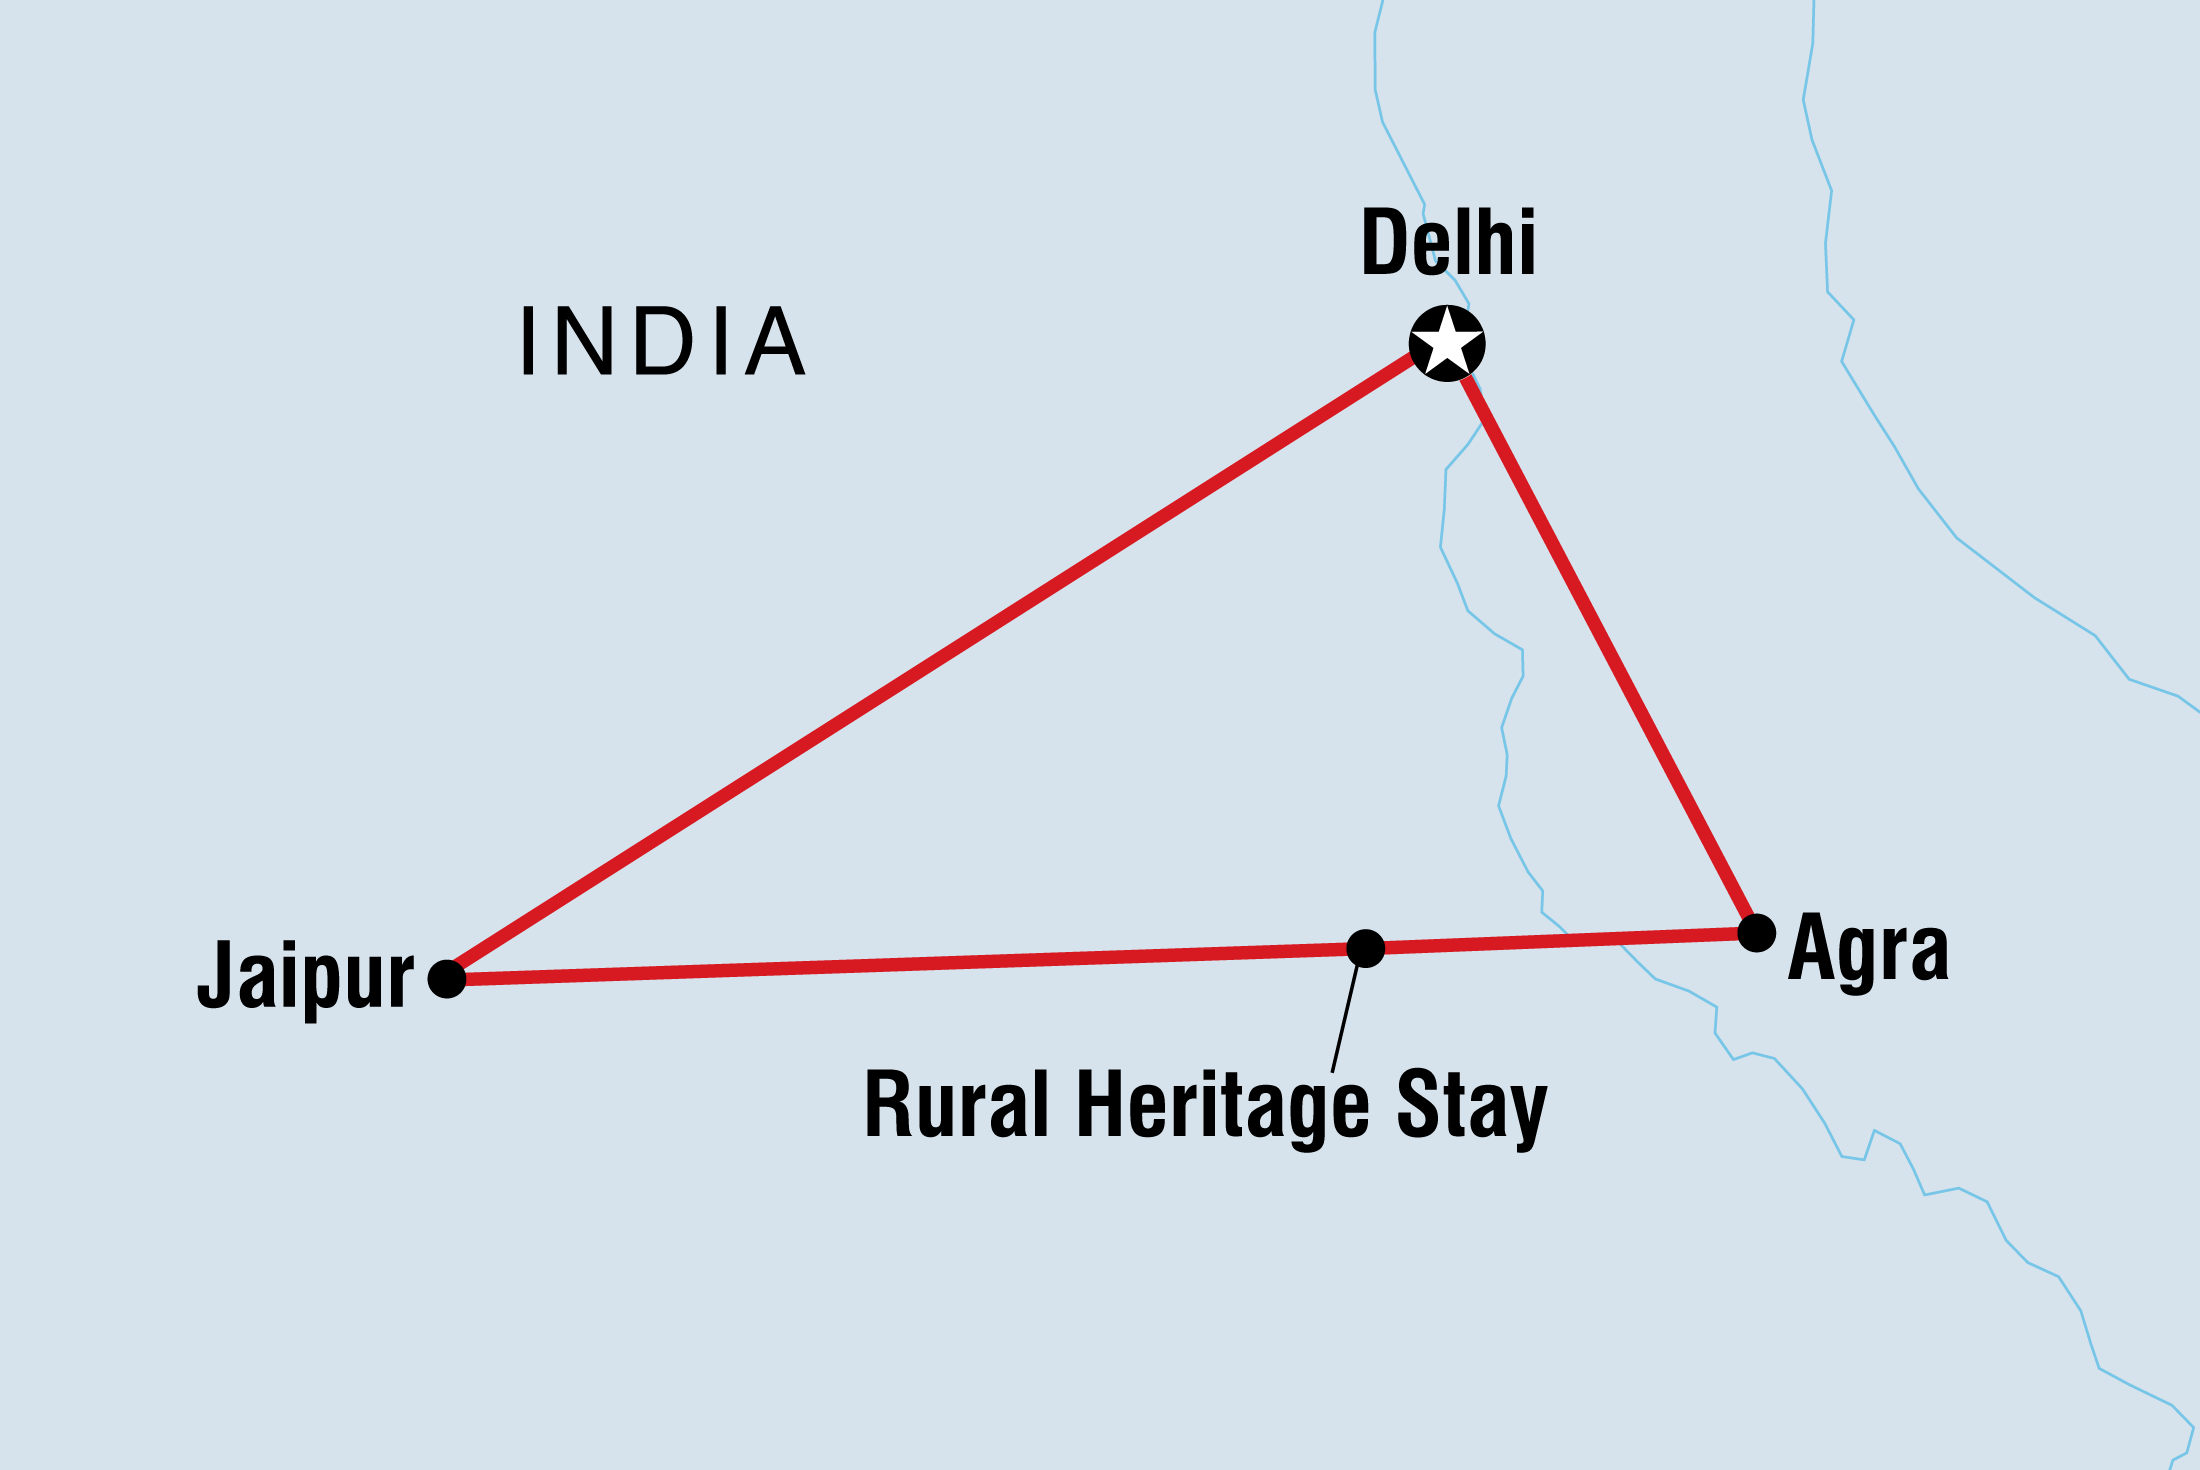 India's Golden Triangle